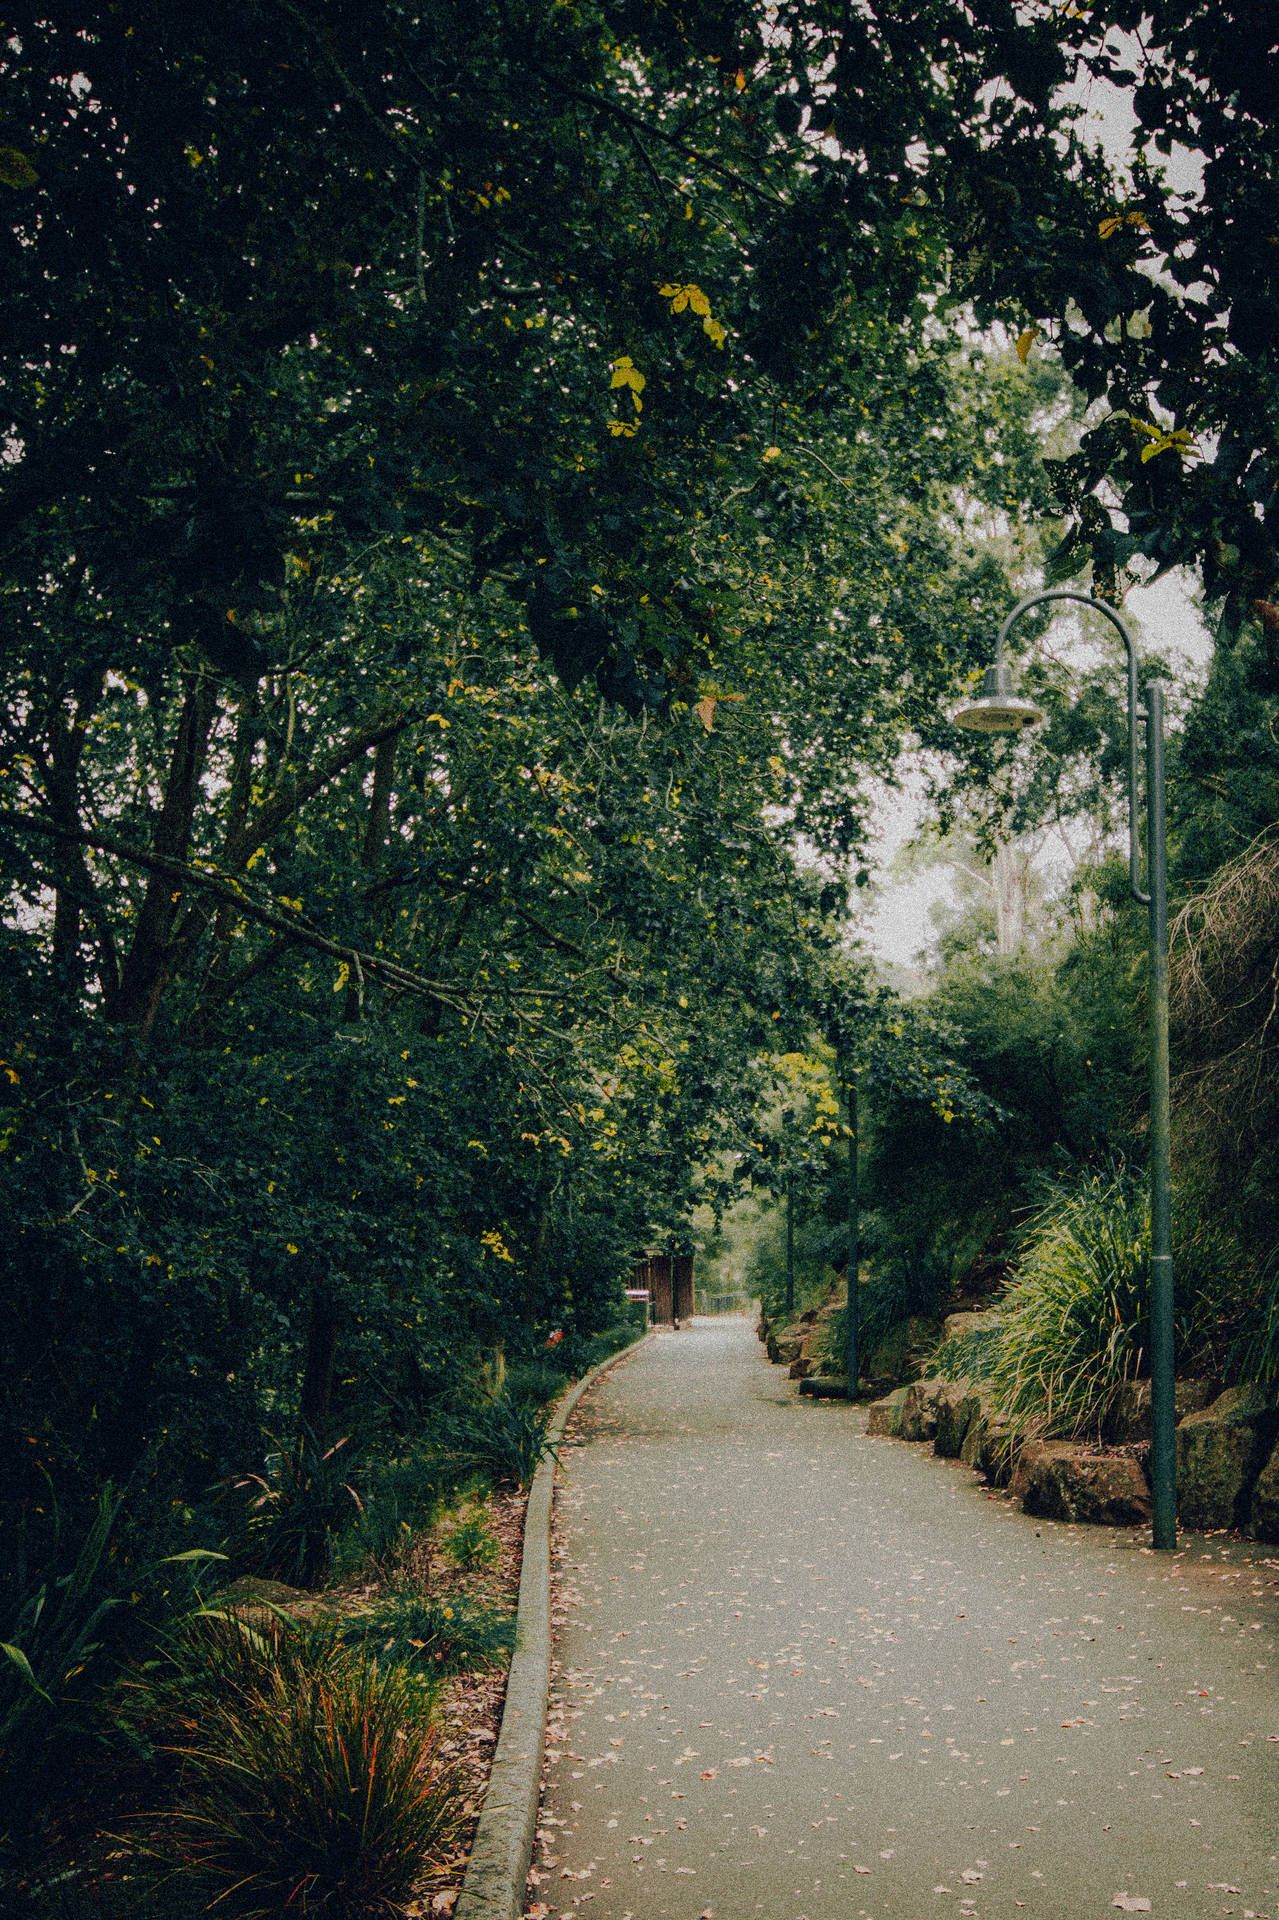 A pathway surrounded by trees - Outdoors